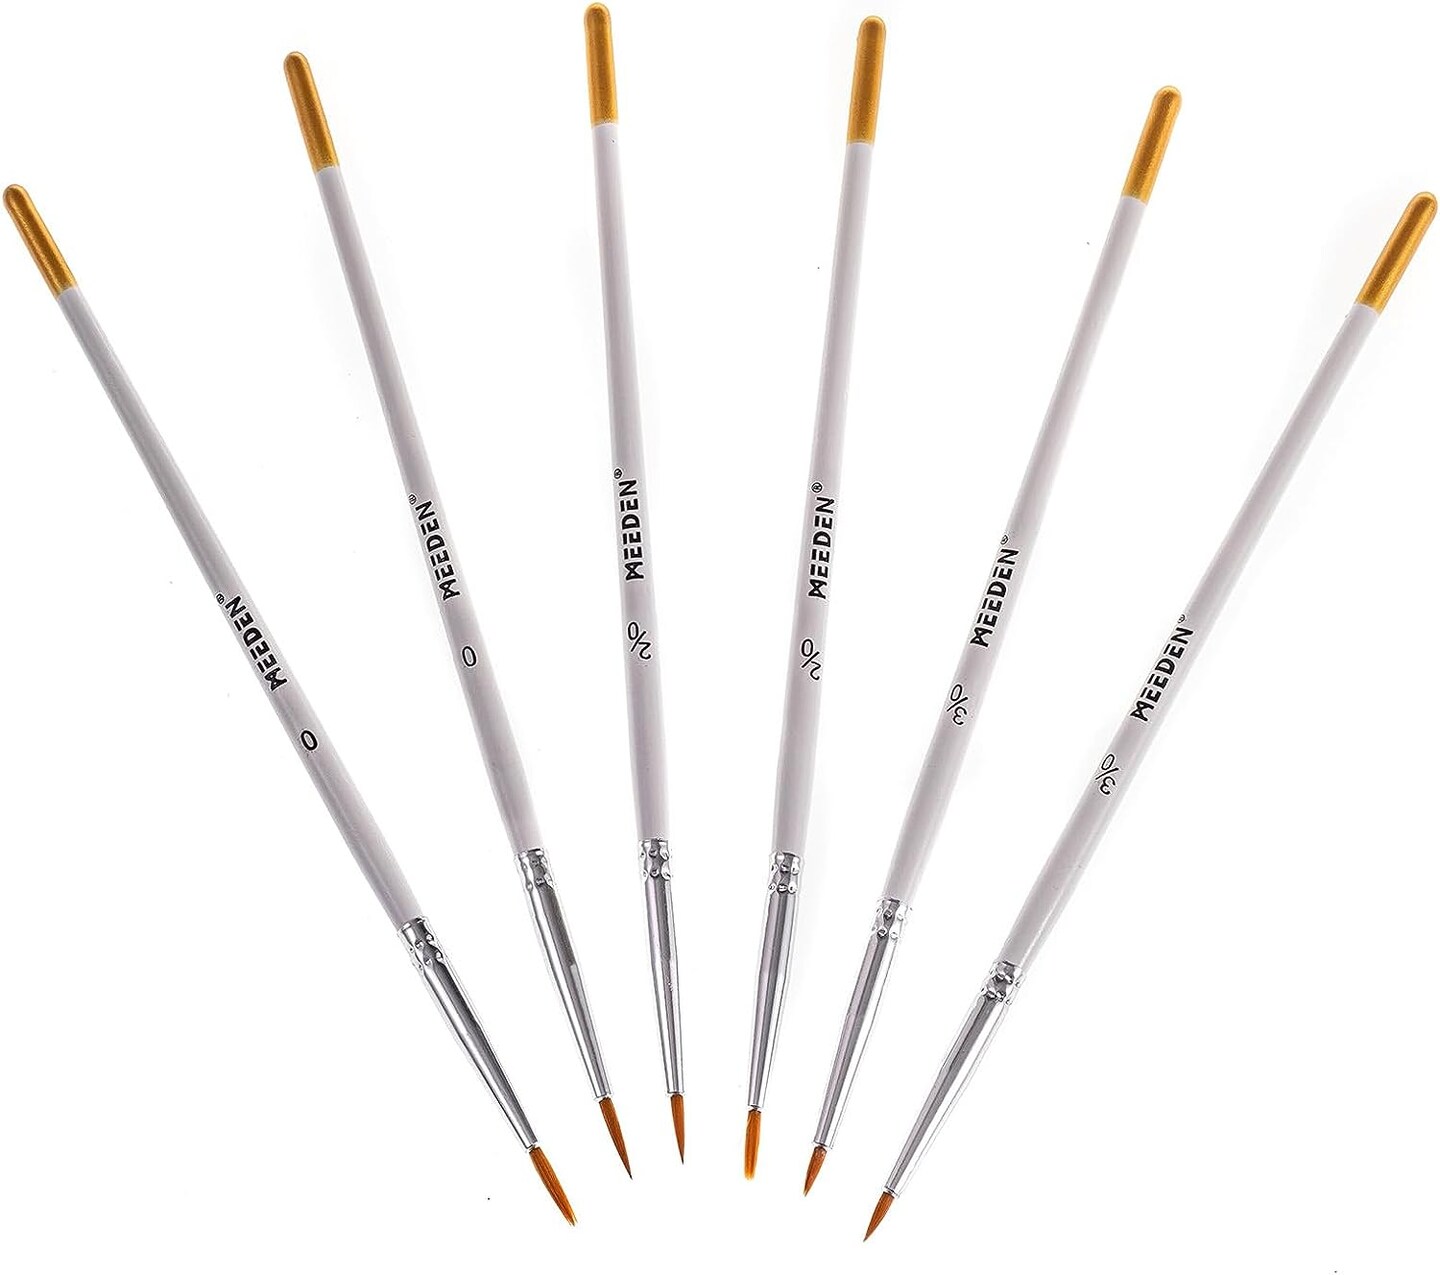 MEEDEN Miniature Detail Paint Brushes, 2/0 3/0 0 Small Fine Tip Paintbrush Set for Acrylic Watercolor Painting, Model Paint Brush for Craft, Nail